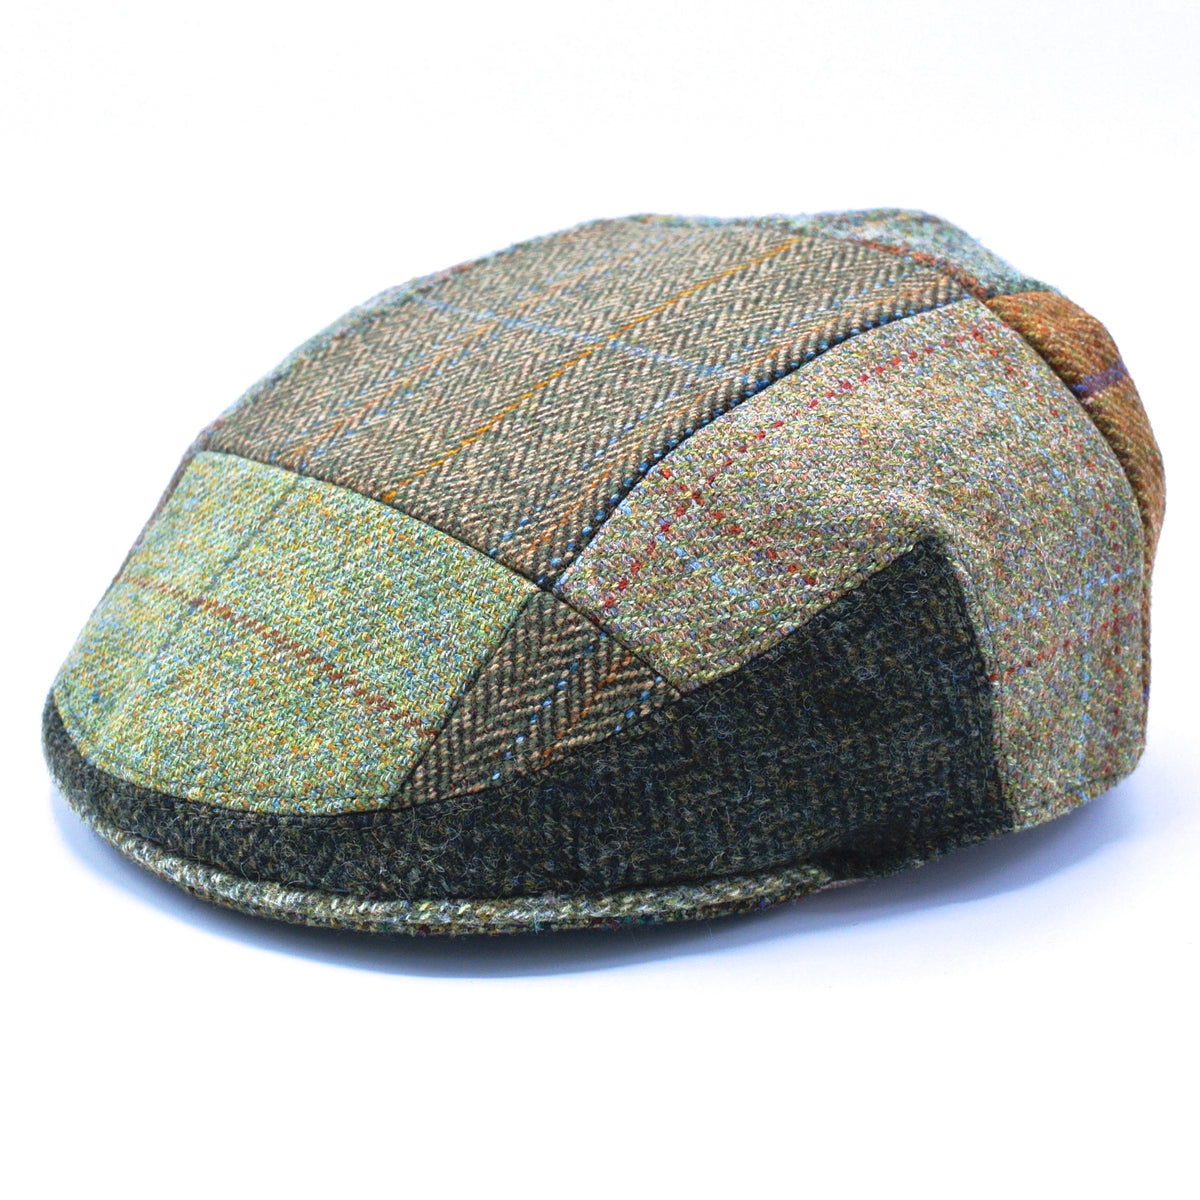 Lawrence and Foster Flat Cap Patterned